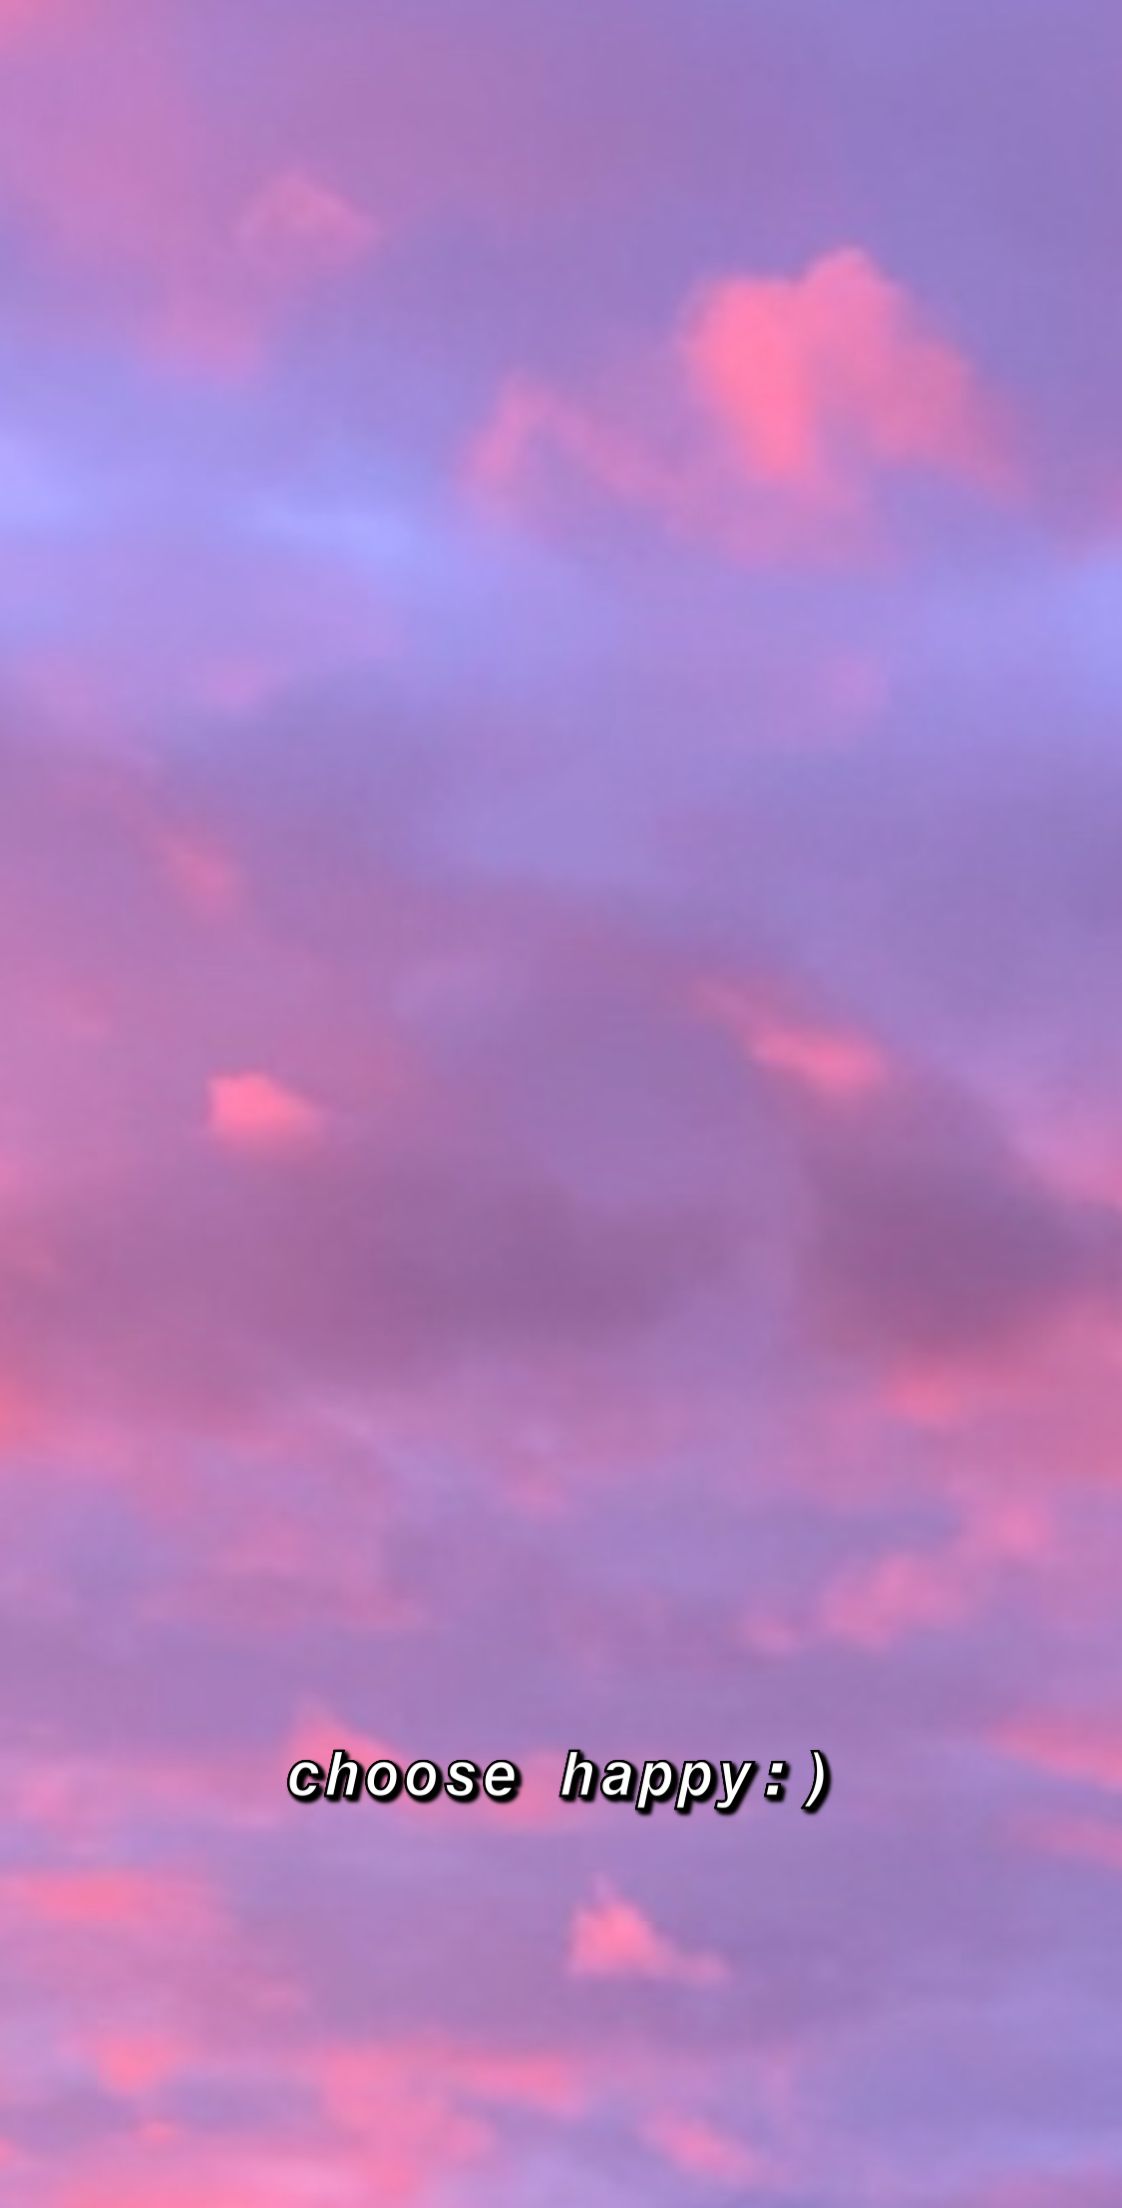 A pink and purple sky with clouds - Happy